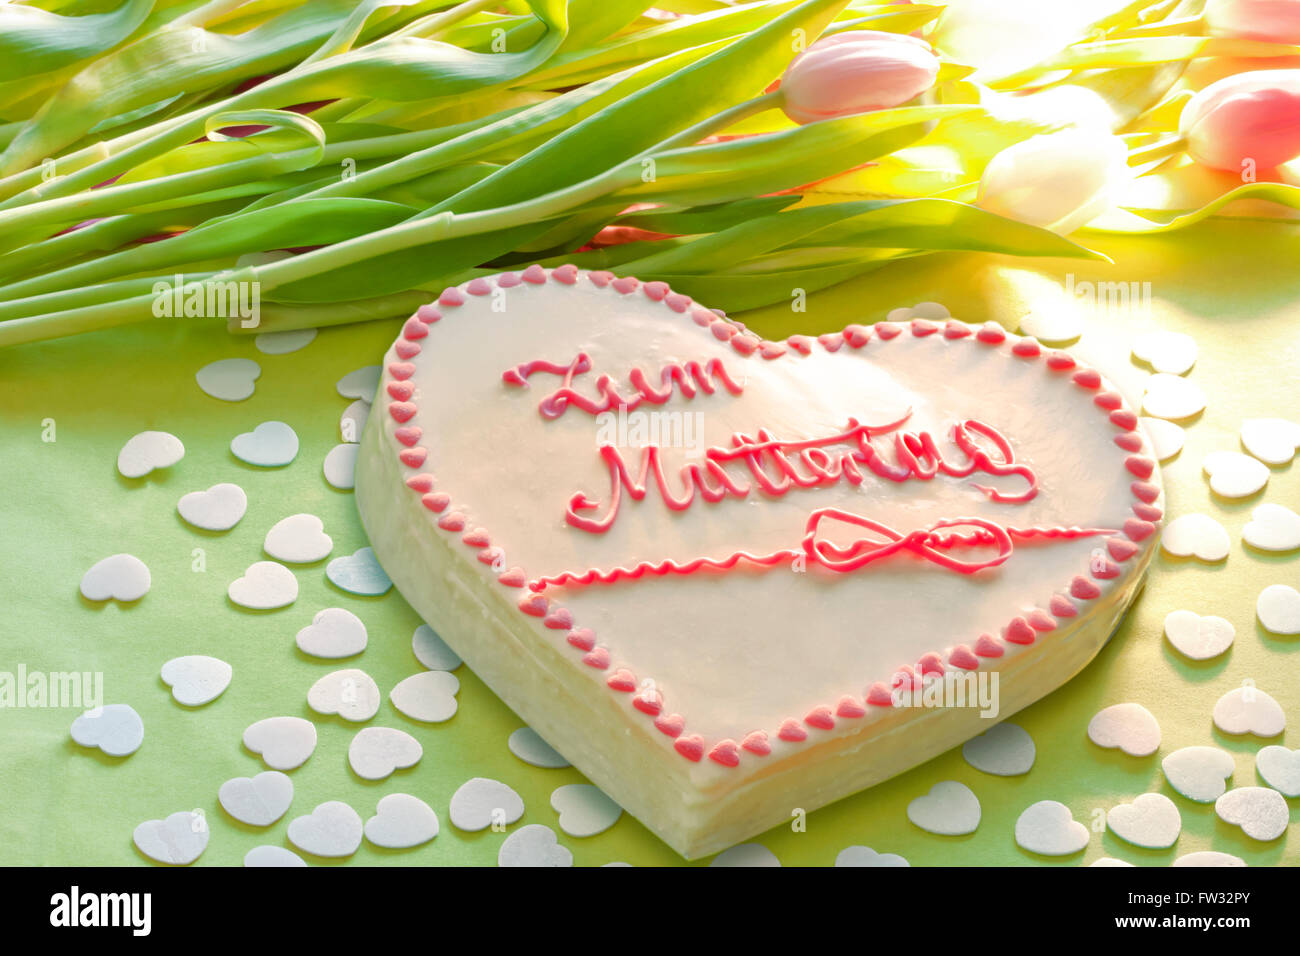 Cake with lettering that says Zum Muttertag, For Mother's Day with flowers Stock Photo